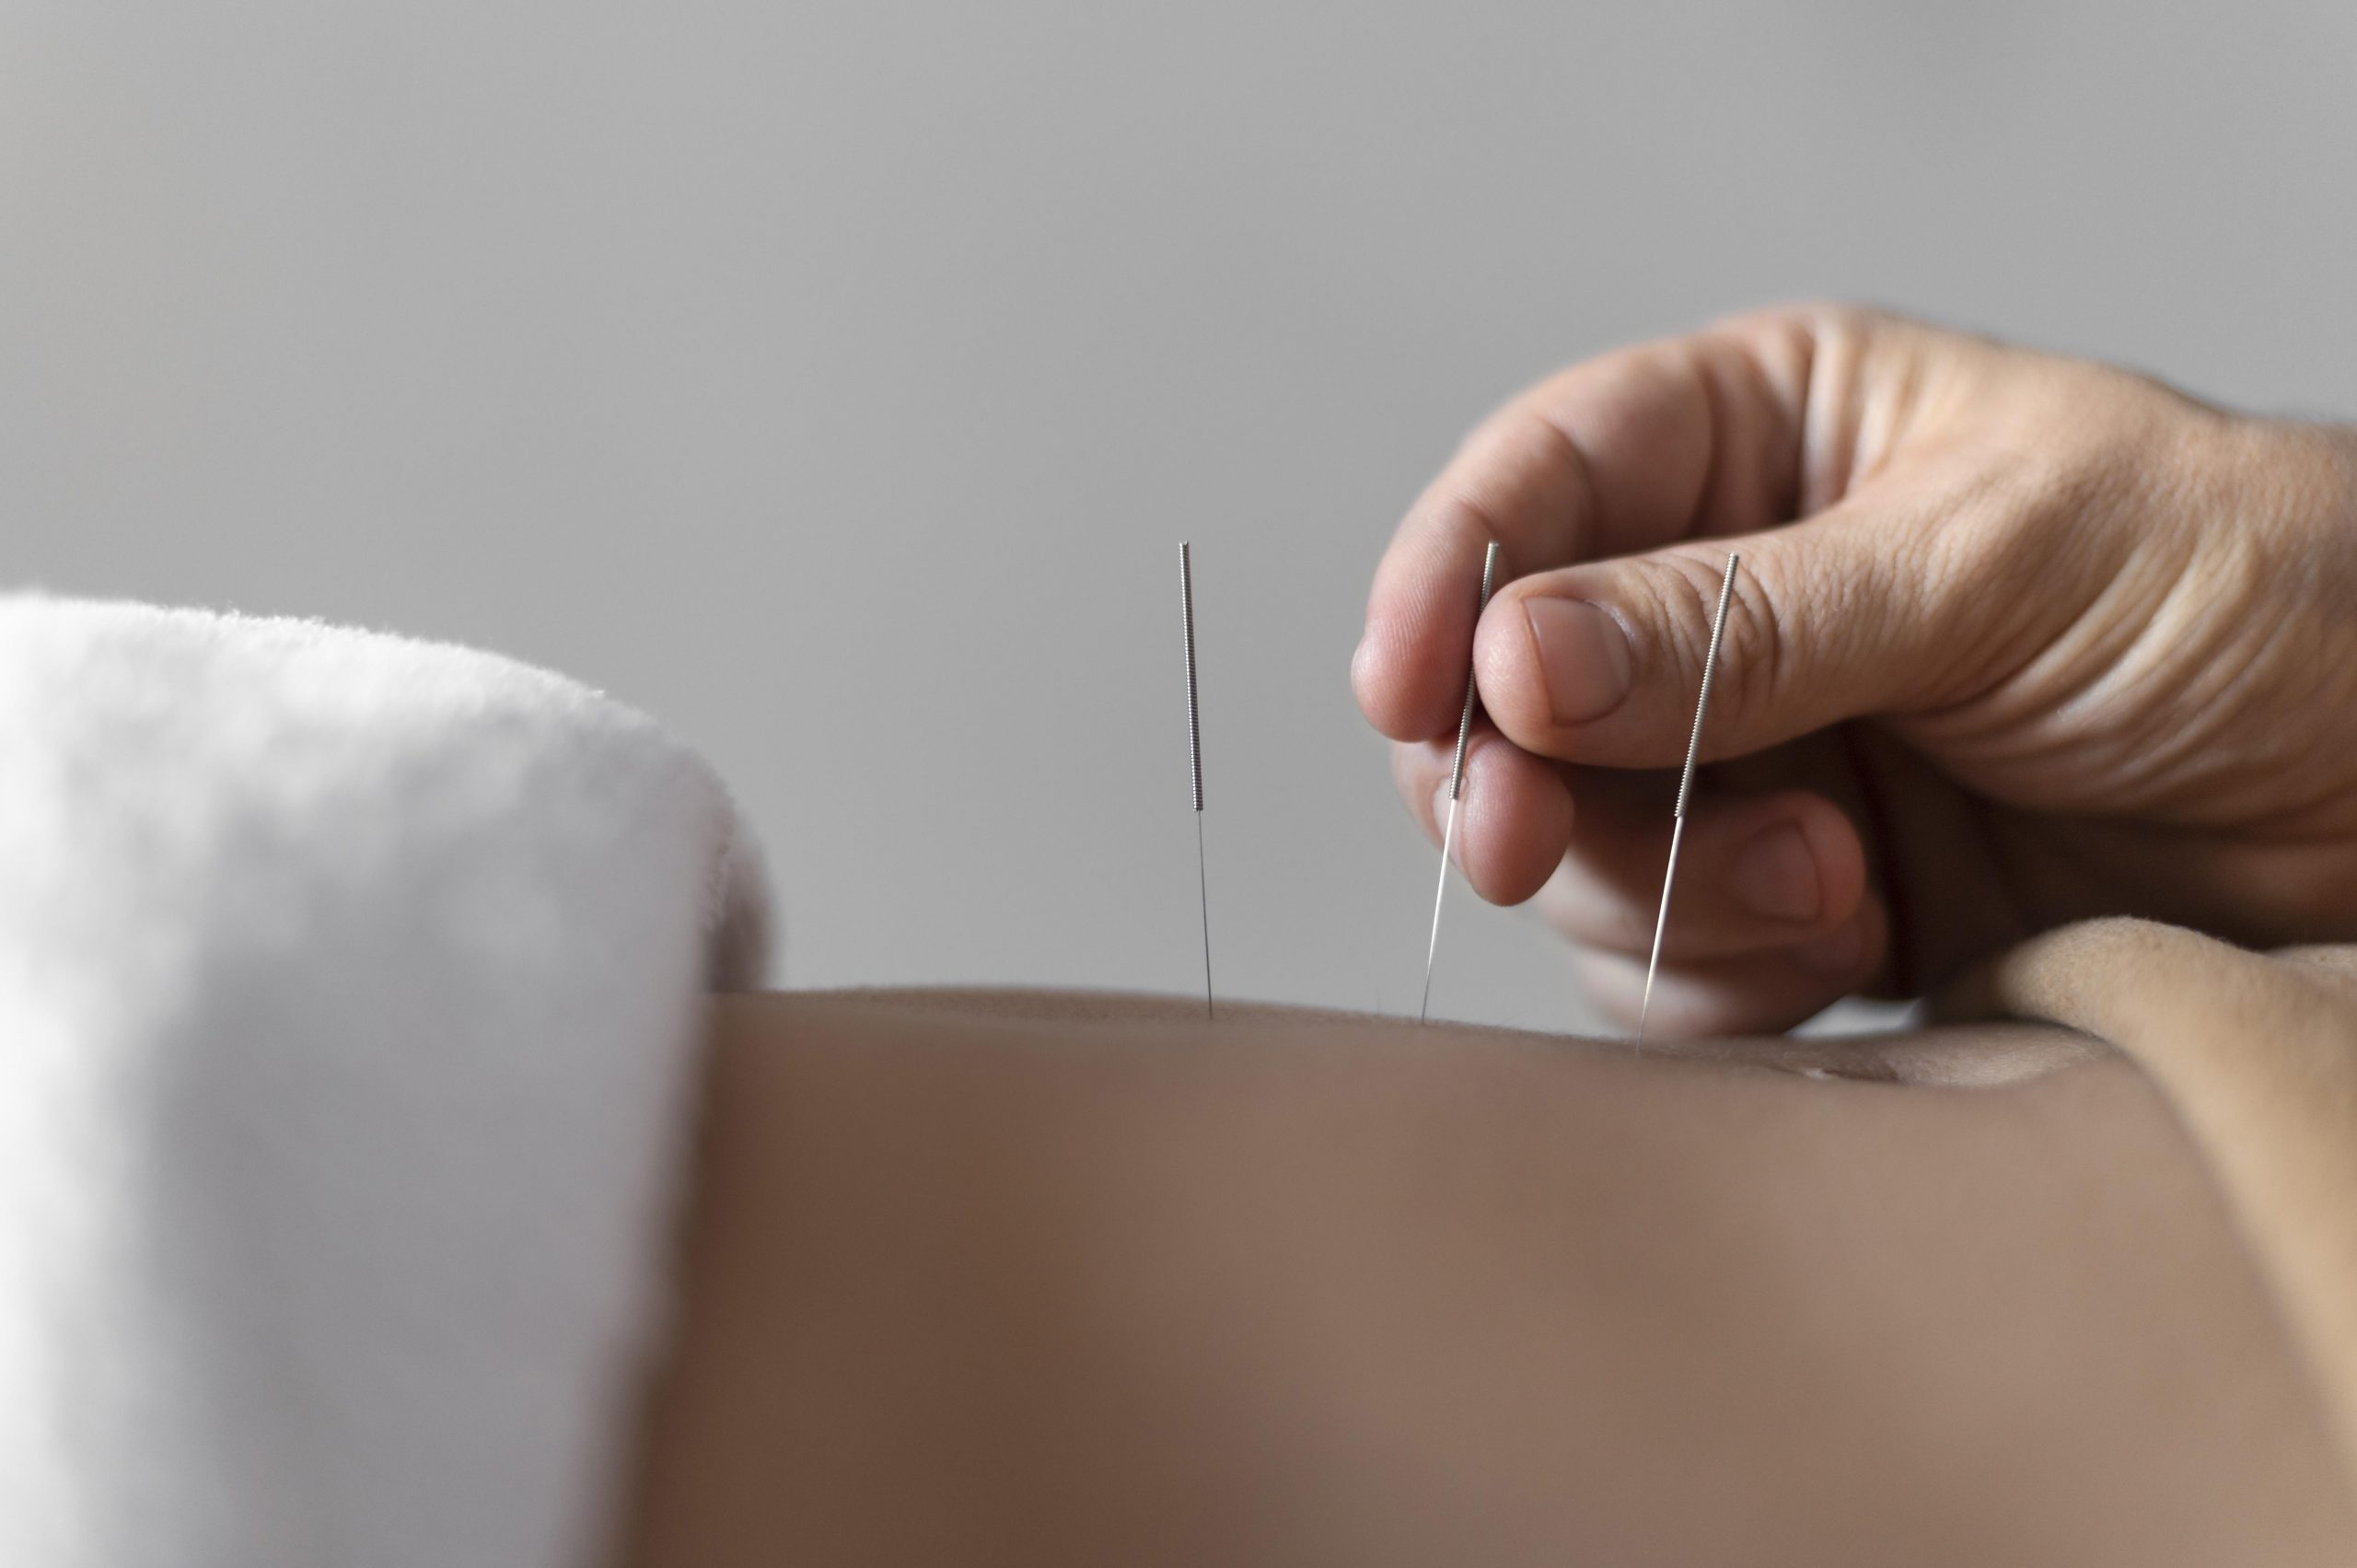 http://hijamahouse.com/wp-content/uploads/2023/01/close-up-hand-holding-acupuncture-needle-scaled.jpg